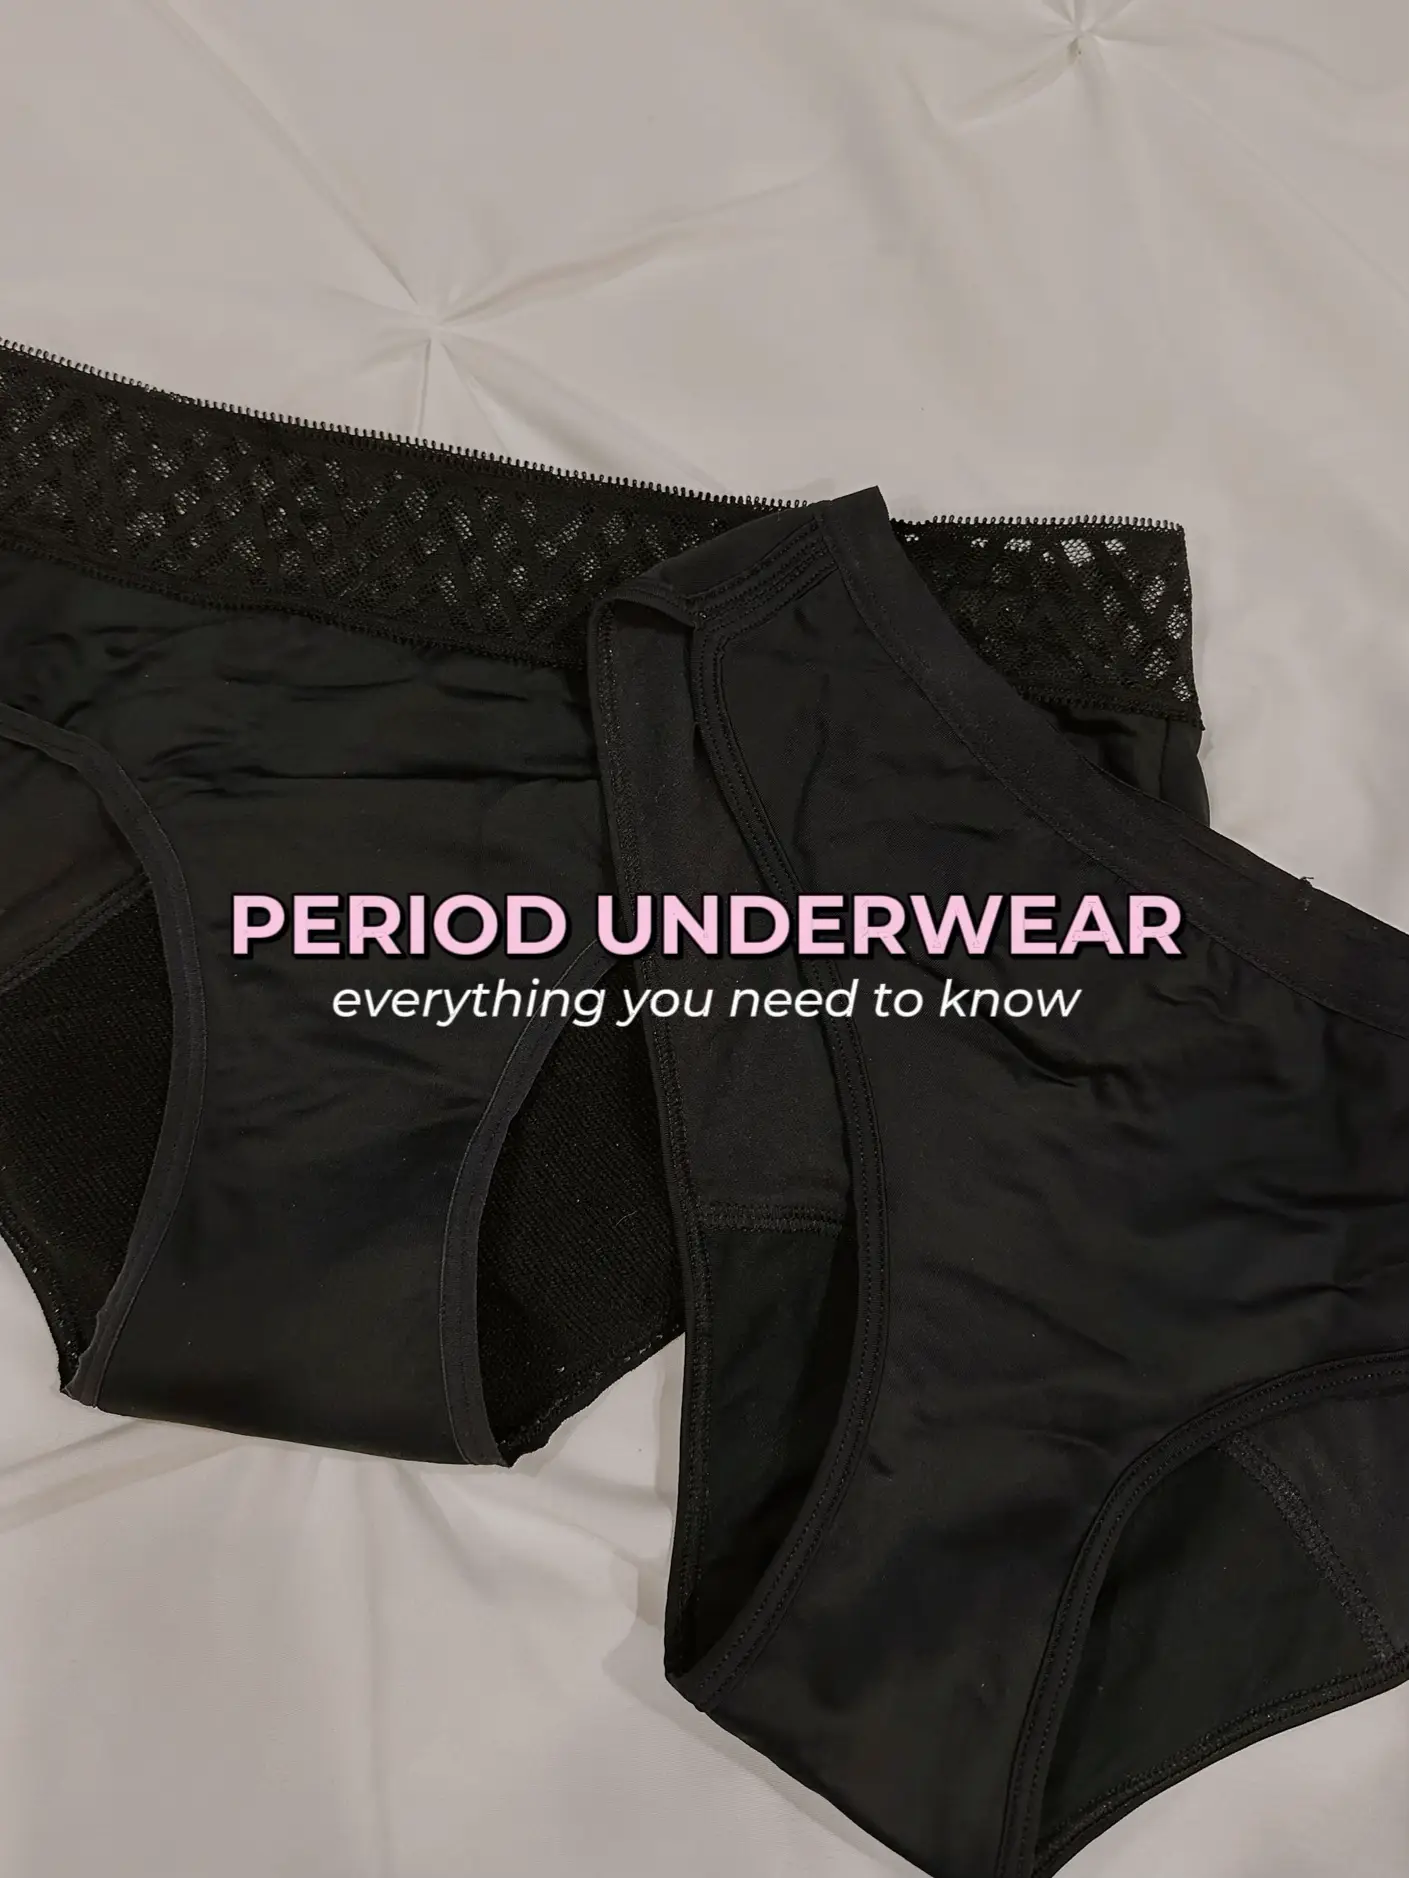 Let's talk about underwear gussets 🌟 they may seem like a small detai